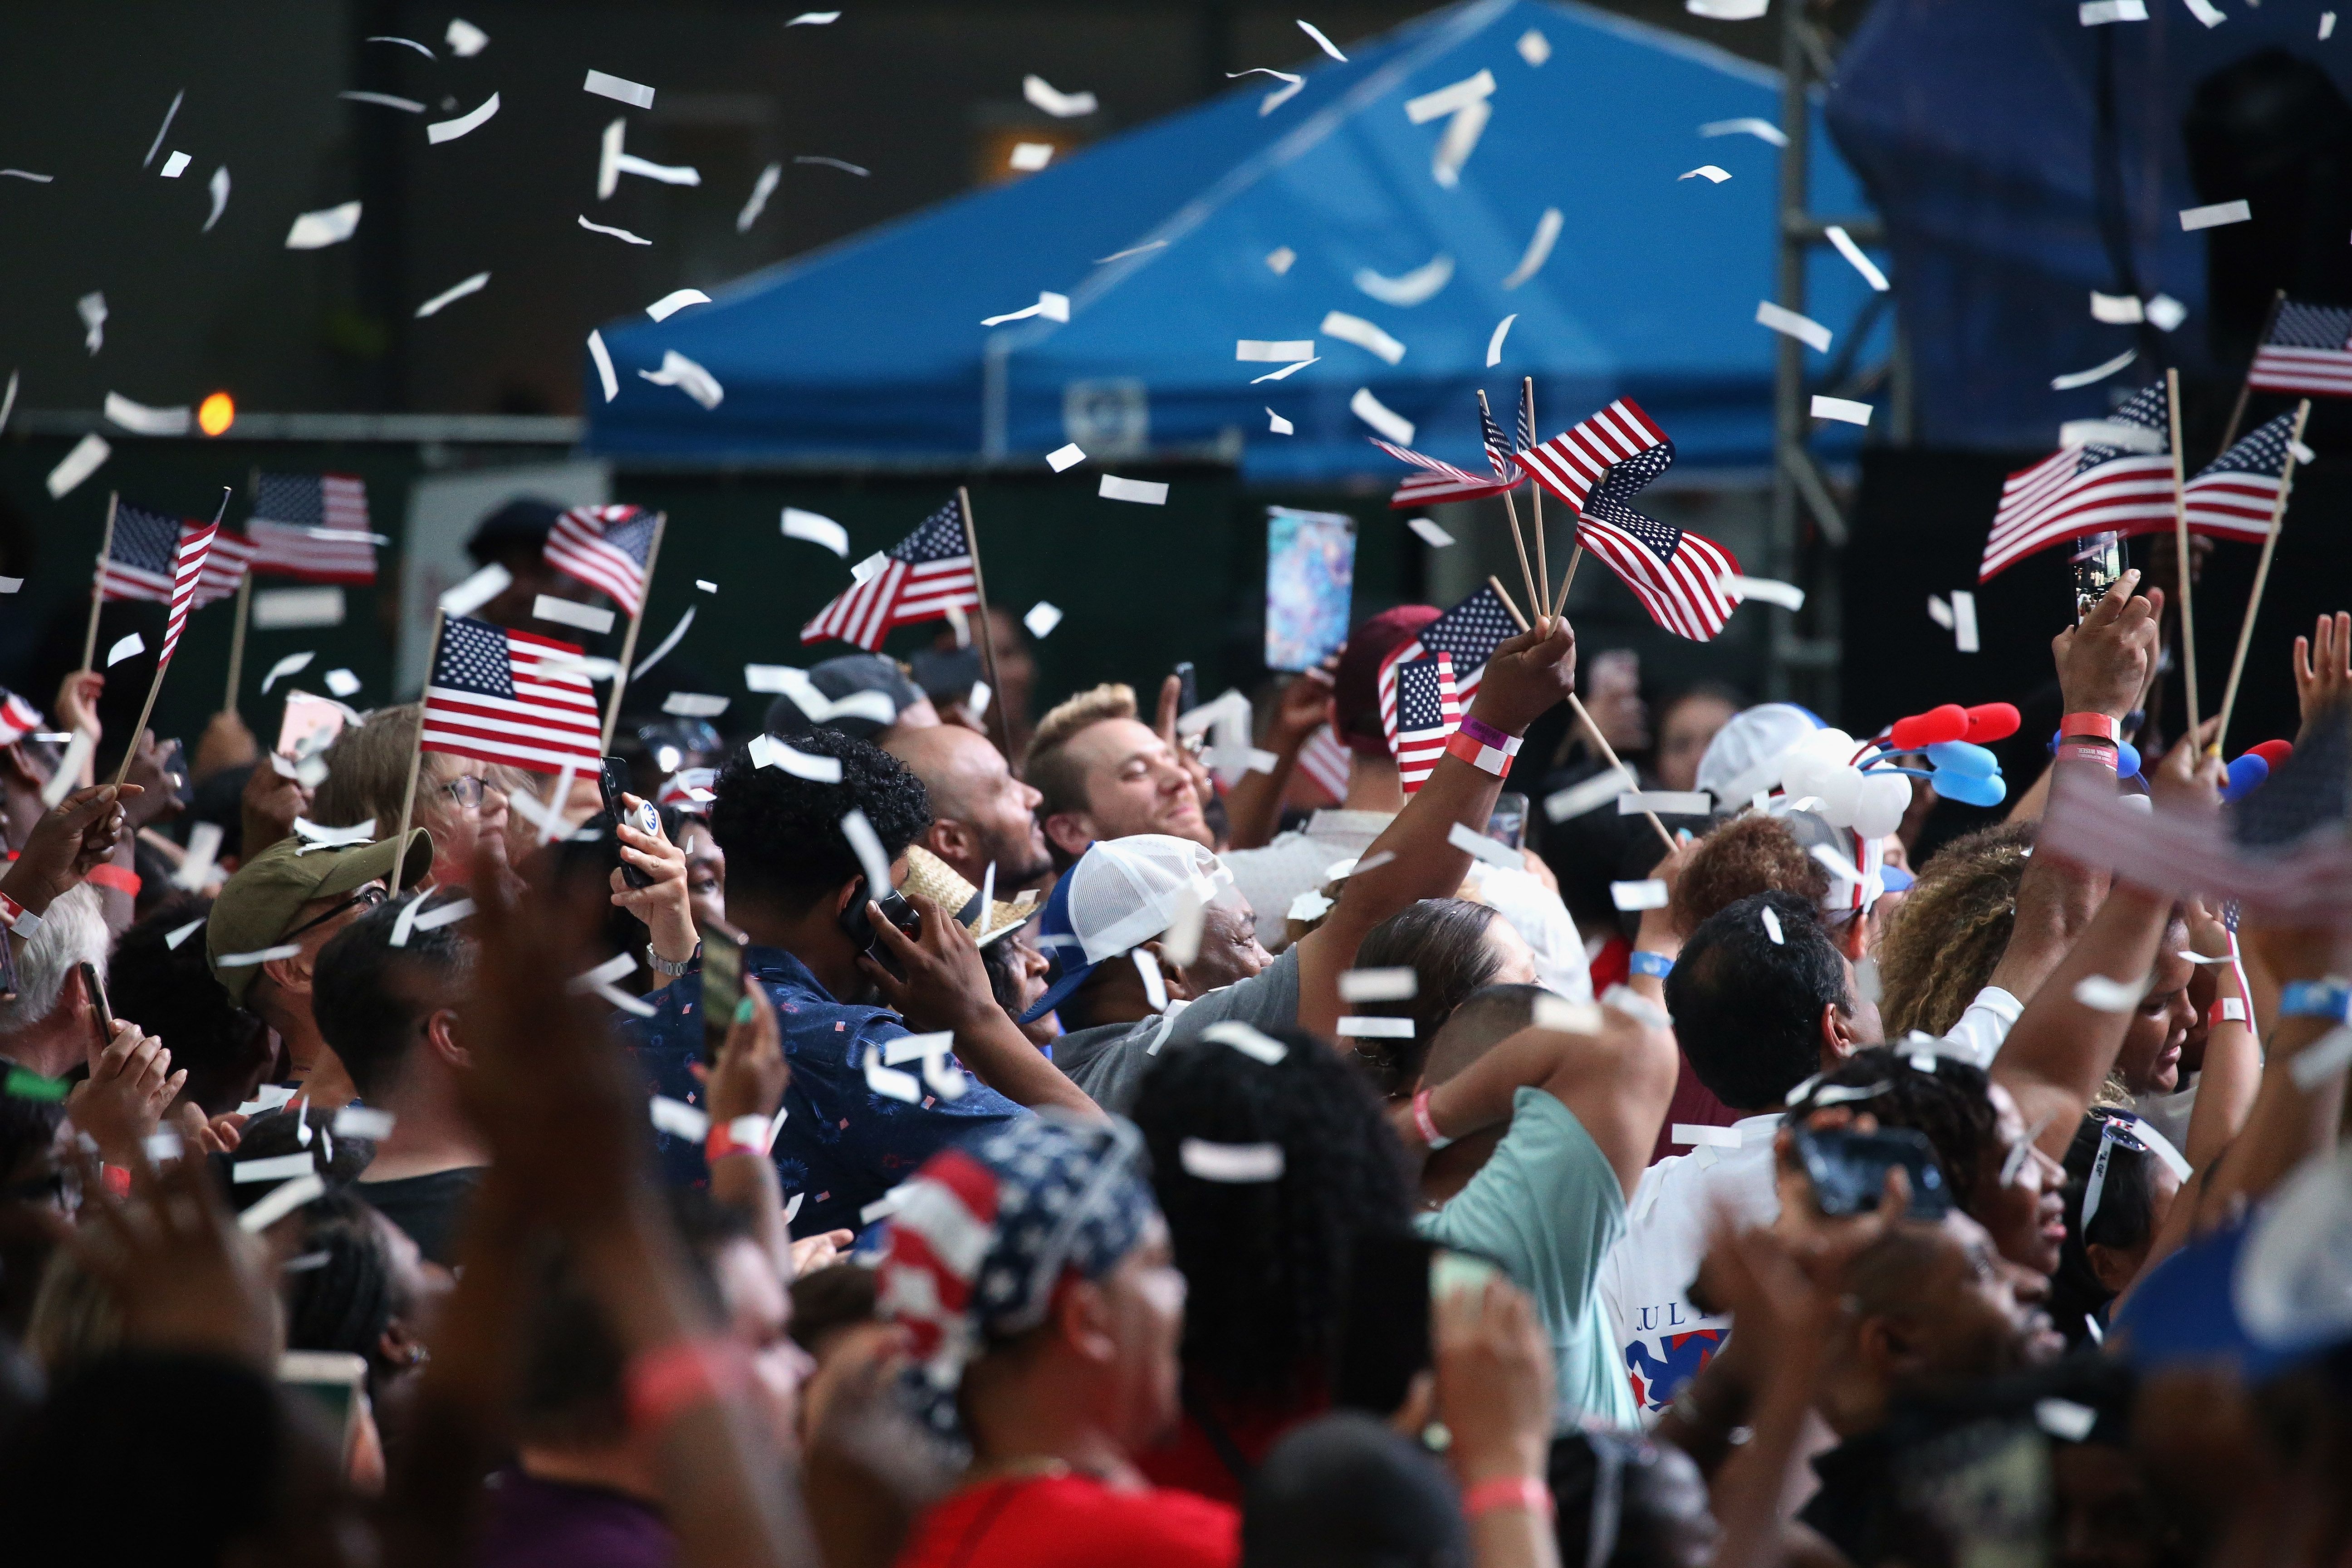 Confetti falls onto a crowd celebrating the Fourth of July in 2019.